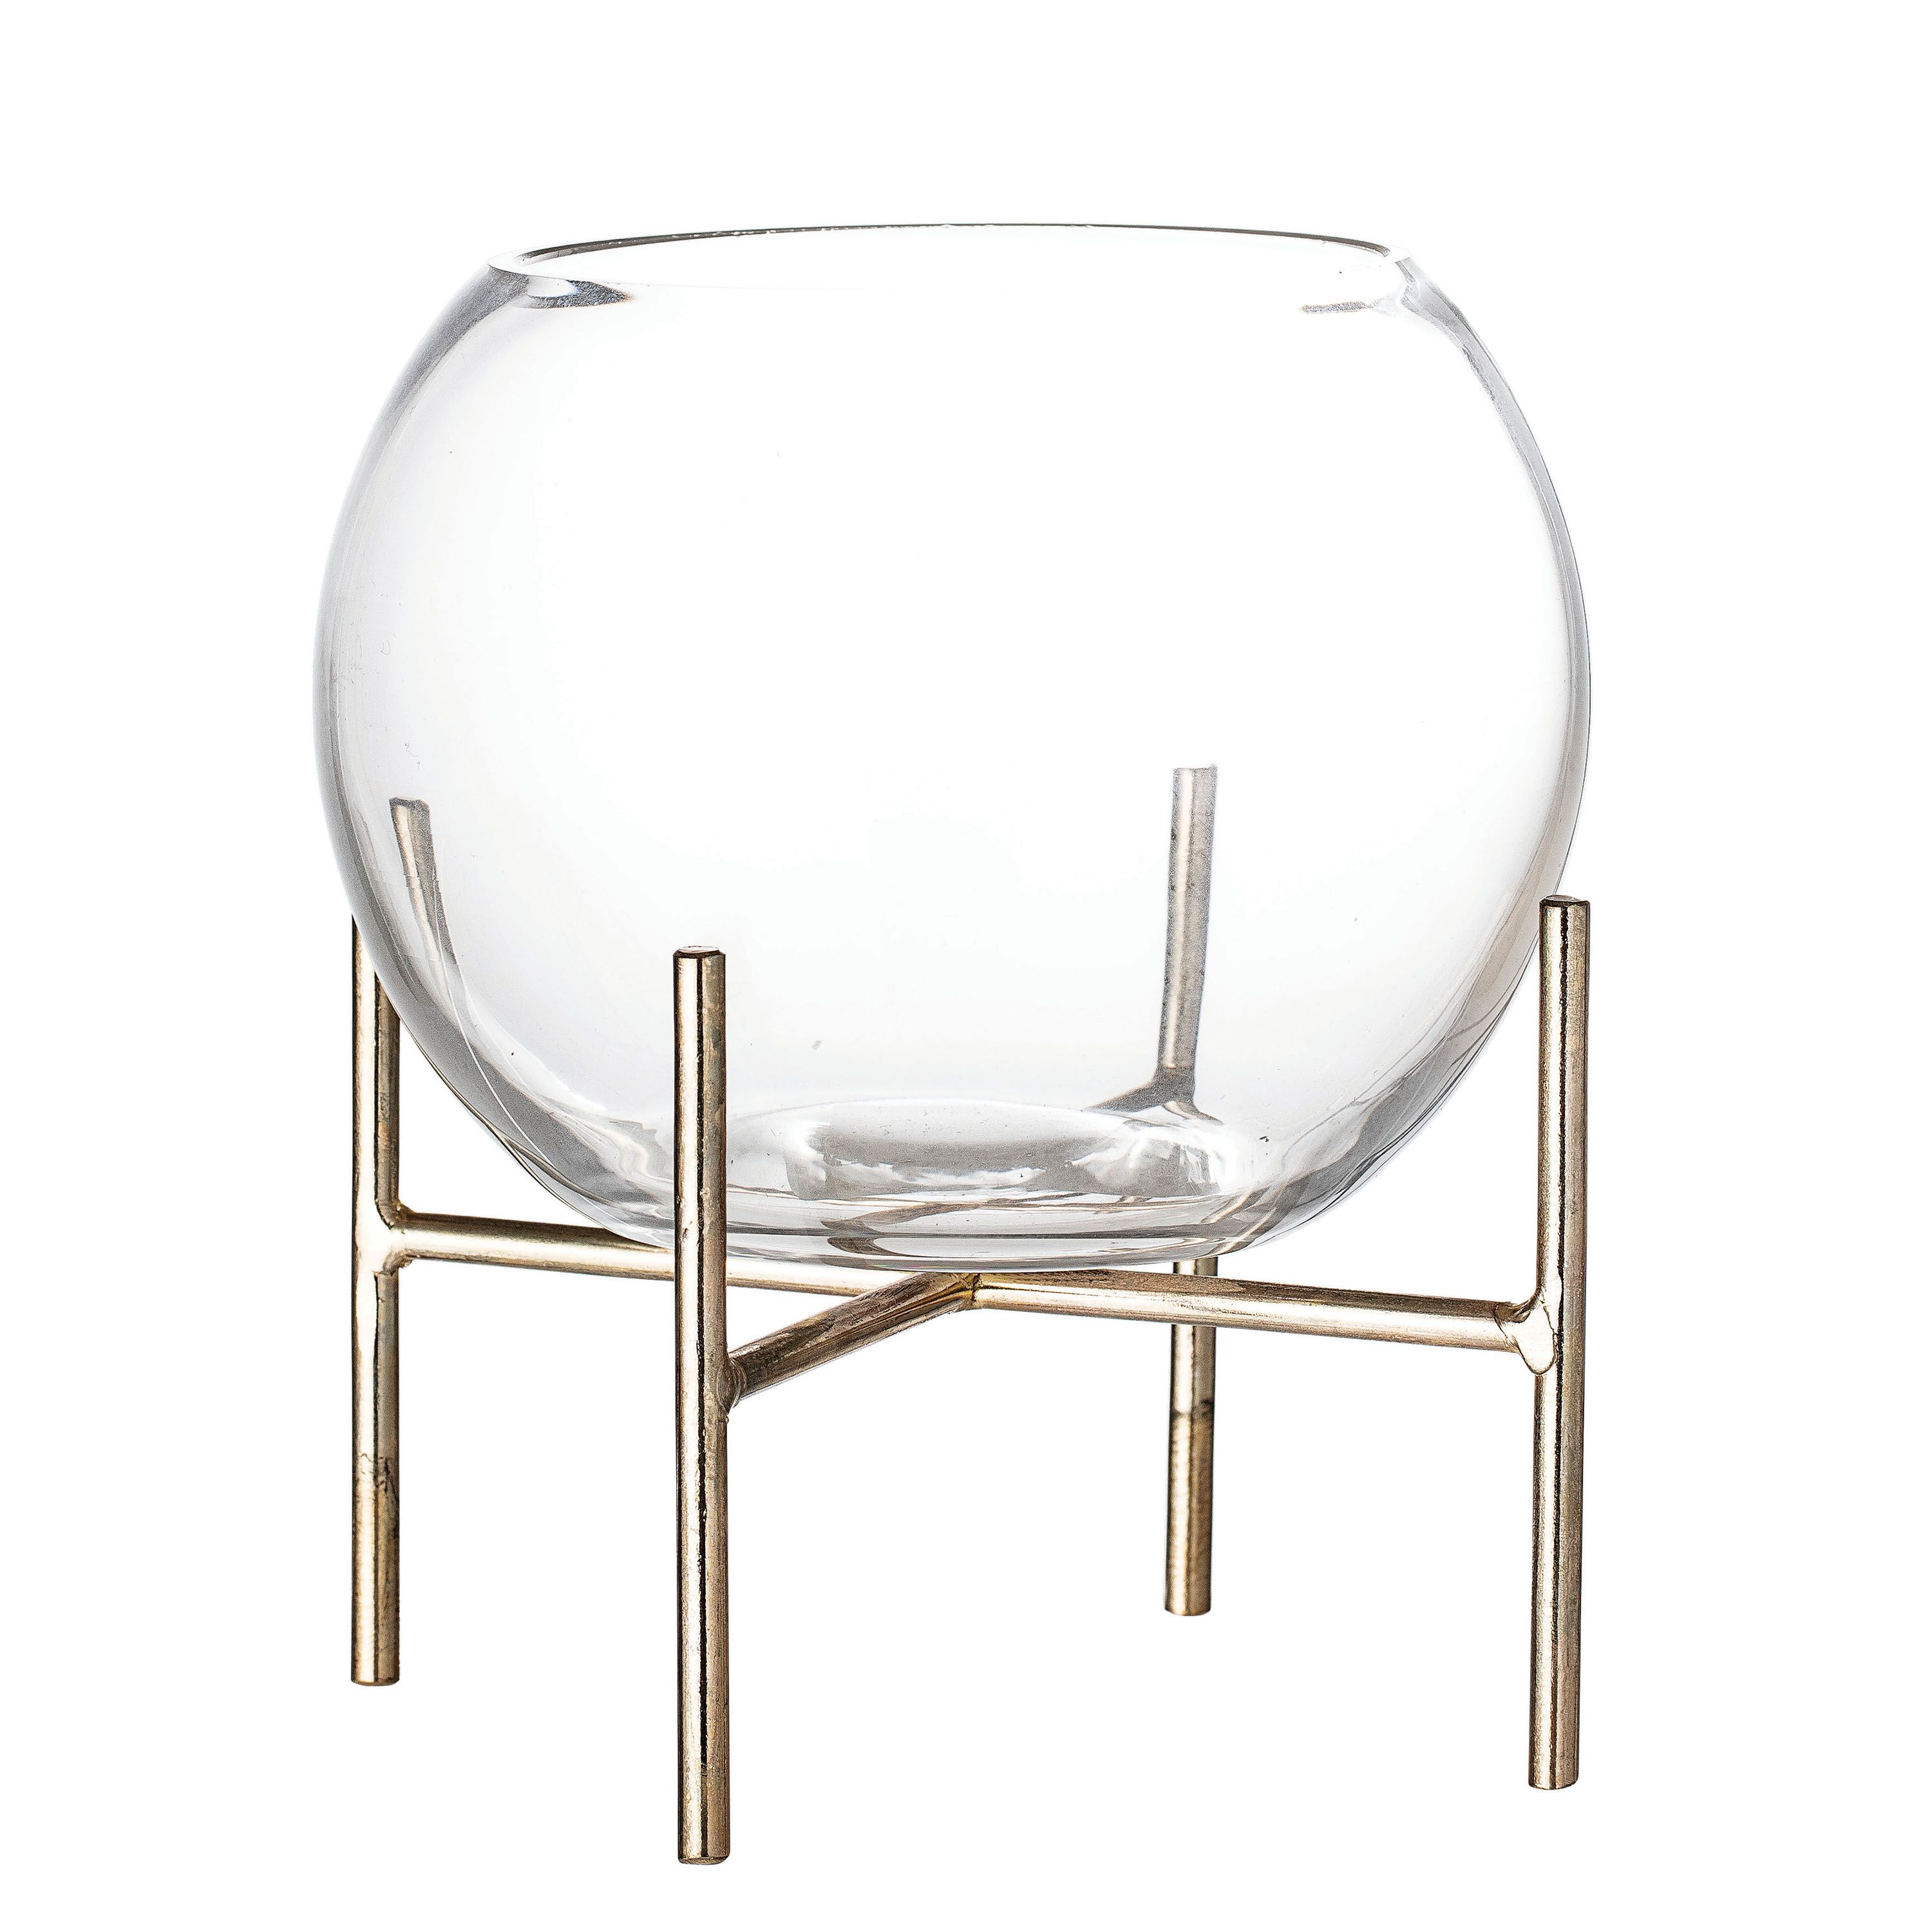 Clear Glass Ball Shaped Vase on Gold Metal Holder (Set of 2 Pieces)